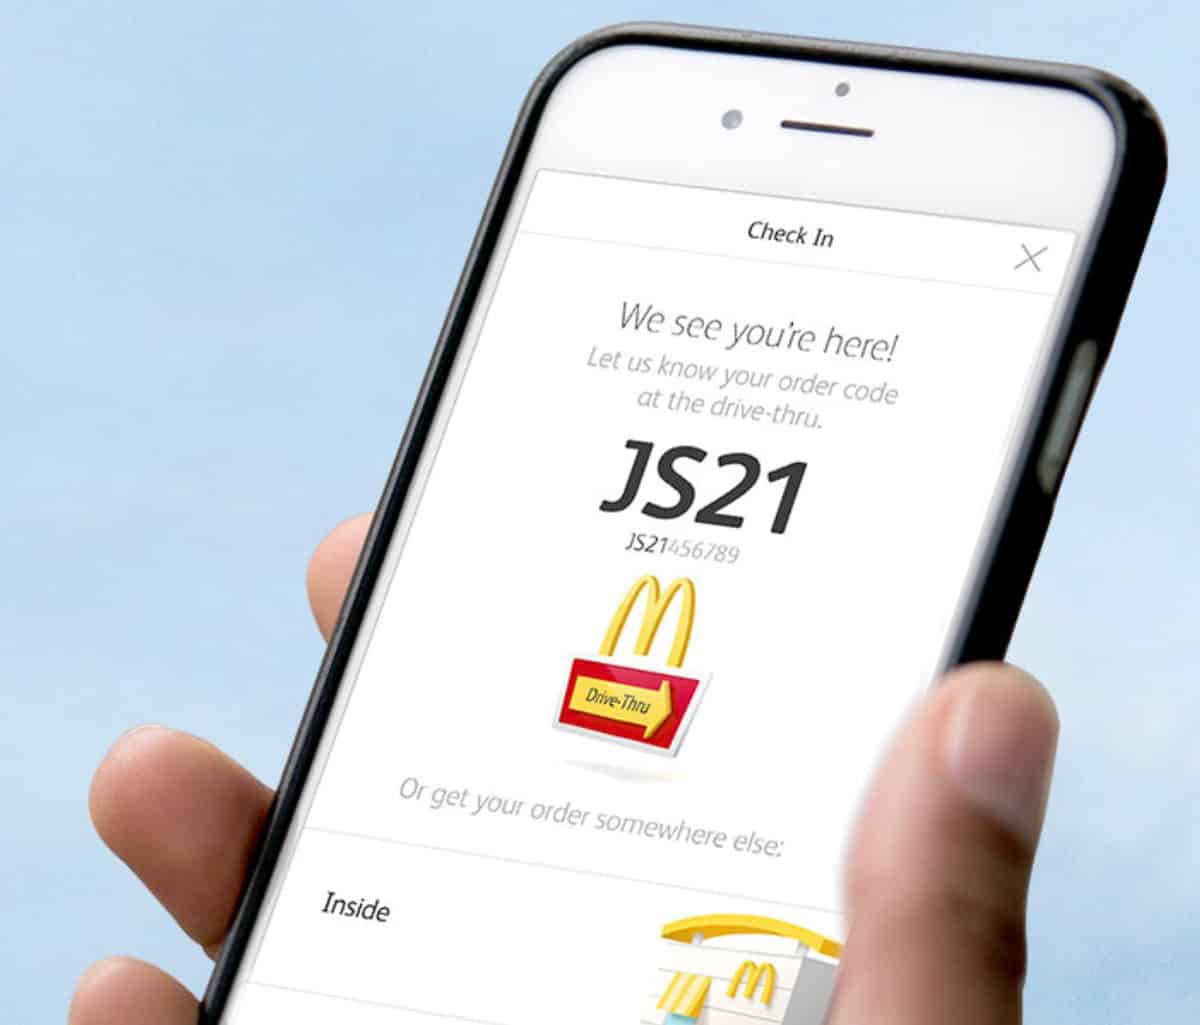 McDonald's Is Testing Mobile Orders from an App - The Mac Observer